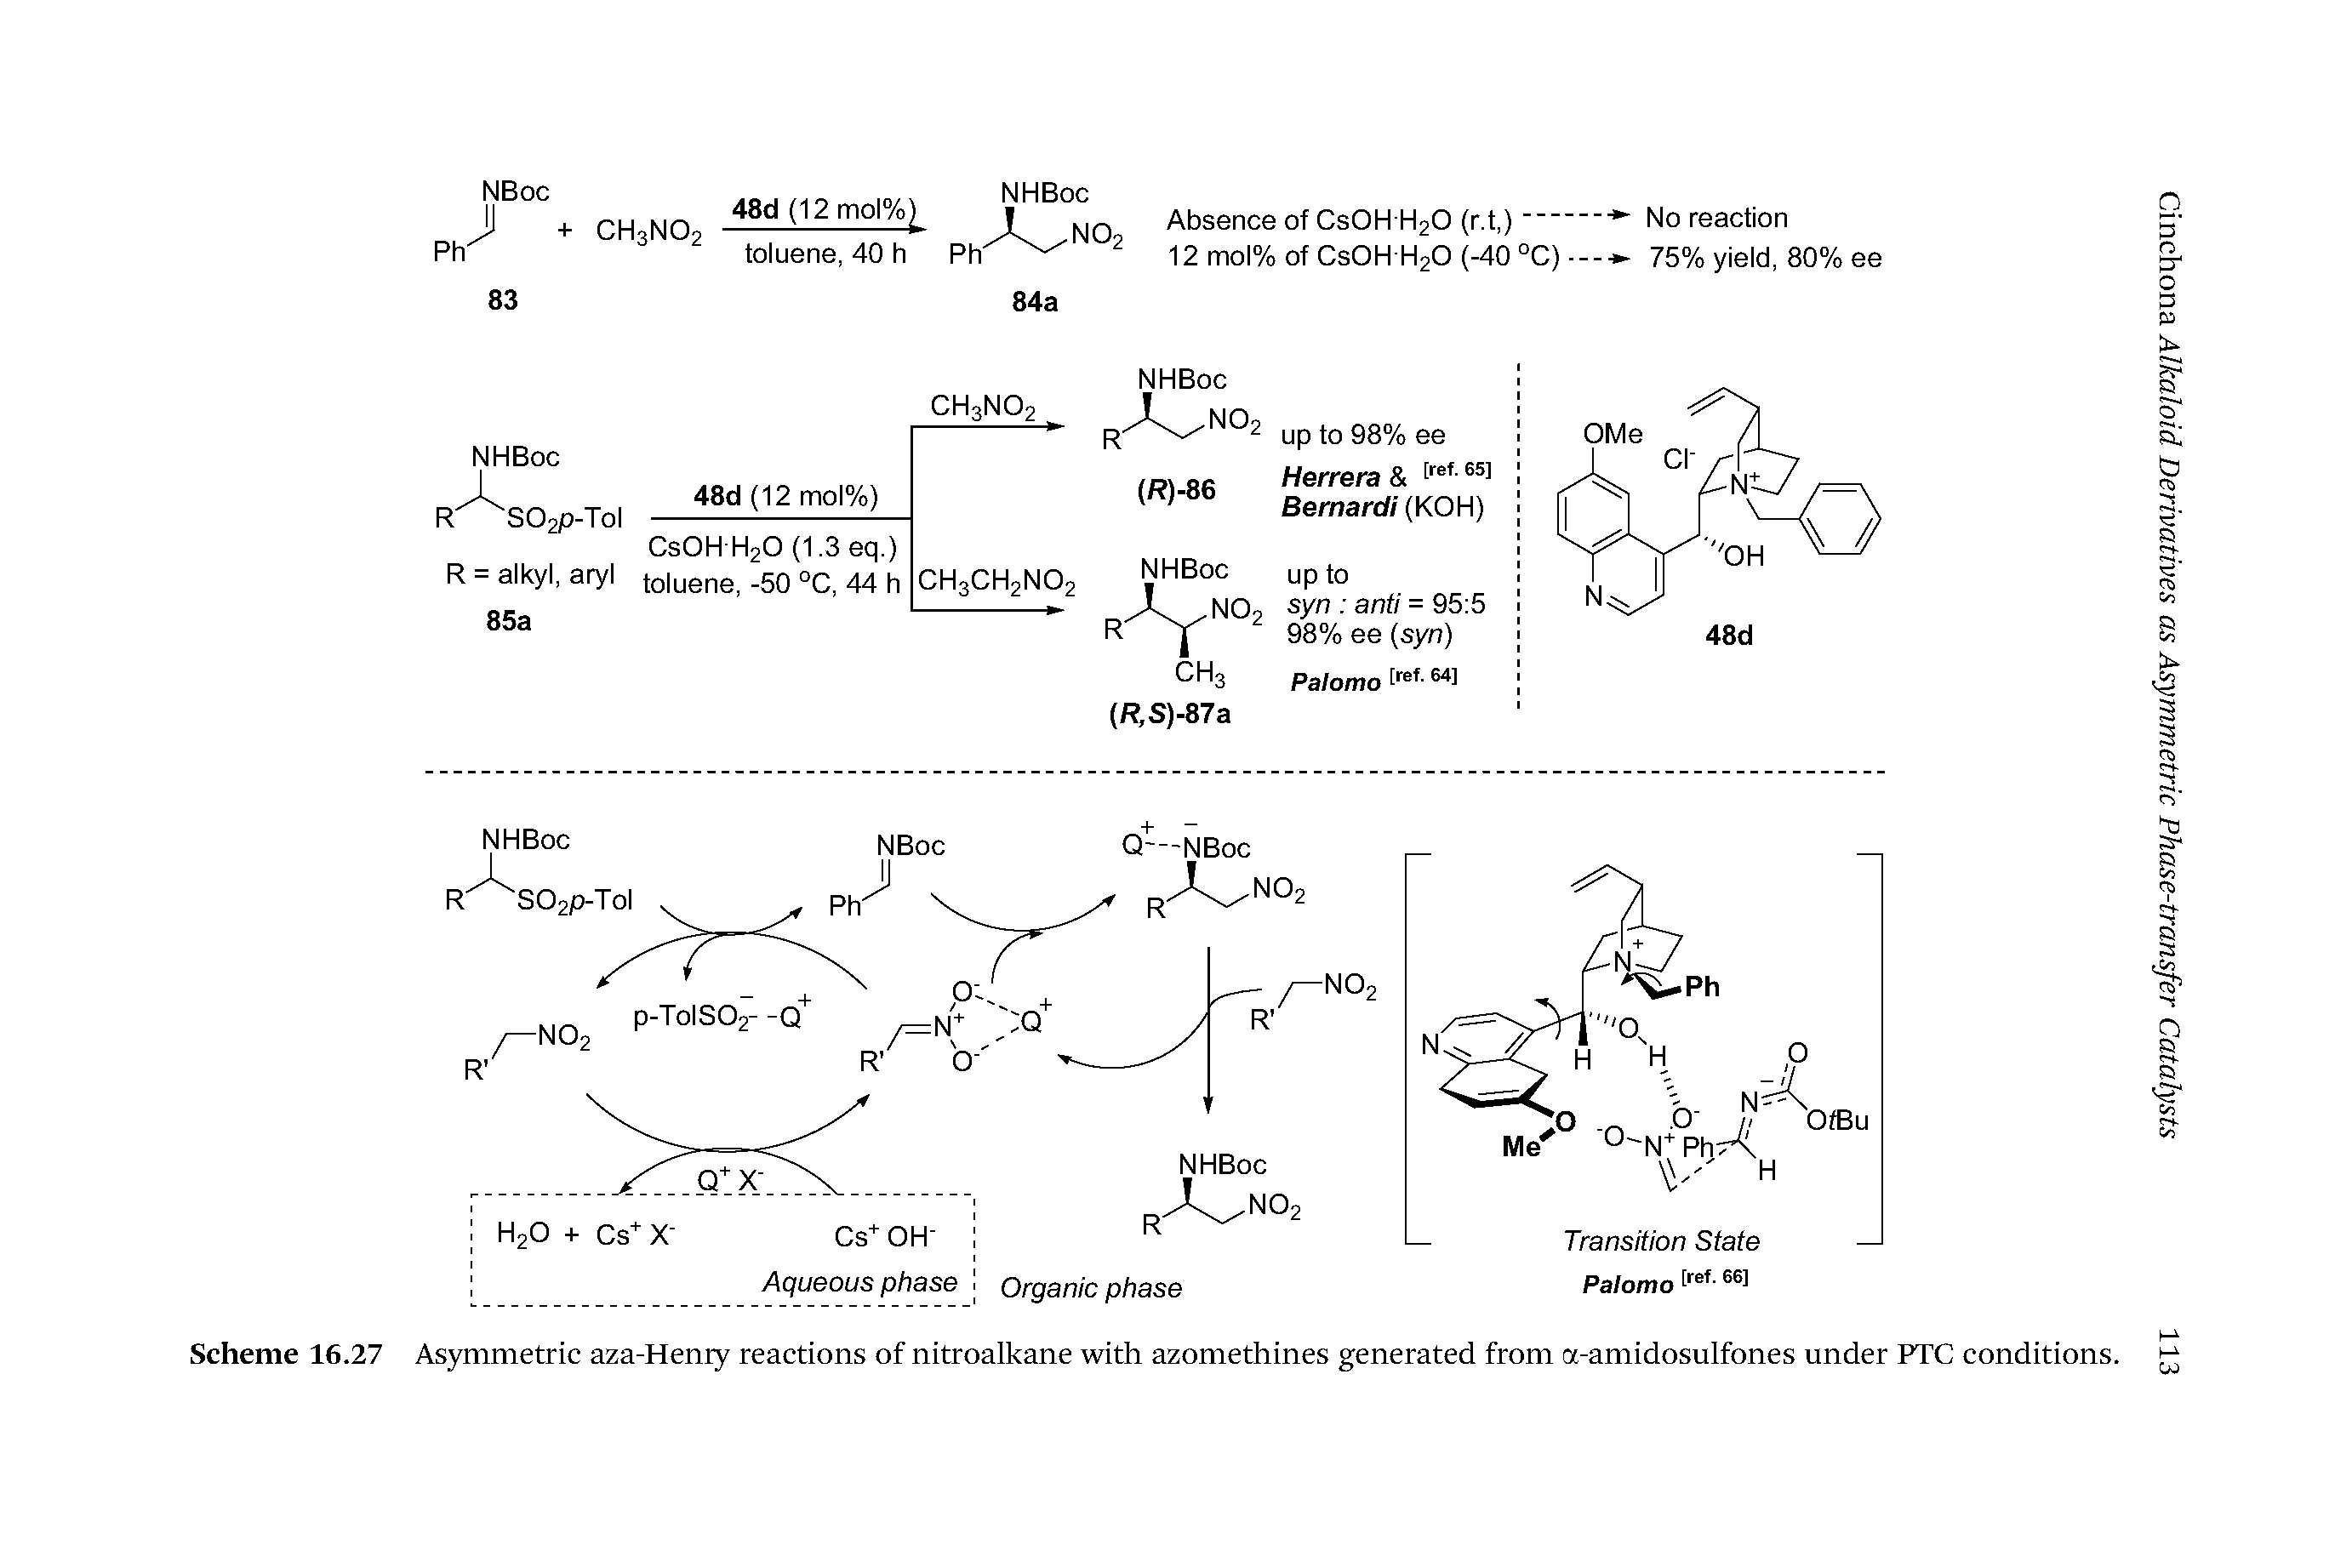 Scheme 16.27 Asymmetric aza-Henry reactions of nitroalkane with azomethines generated from a-amidosulfones under PTC conditions.